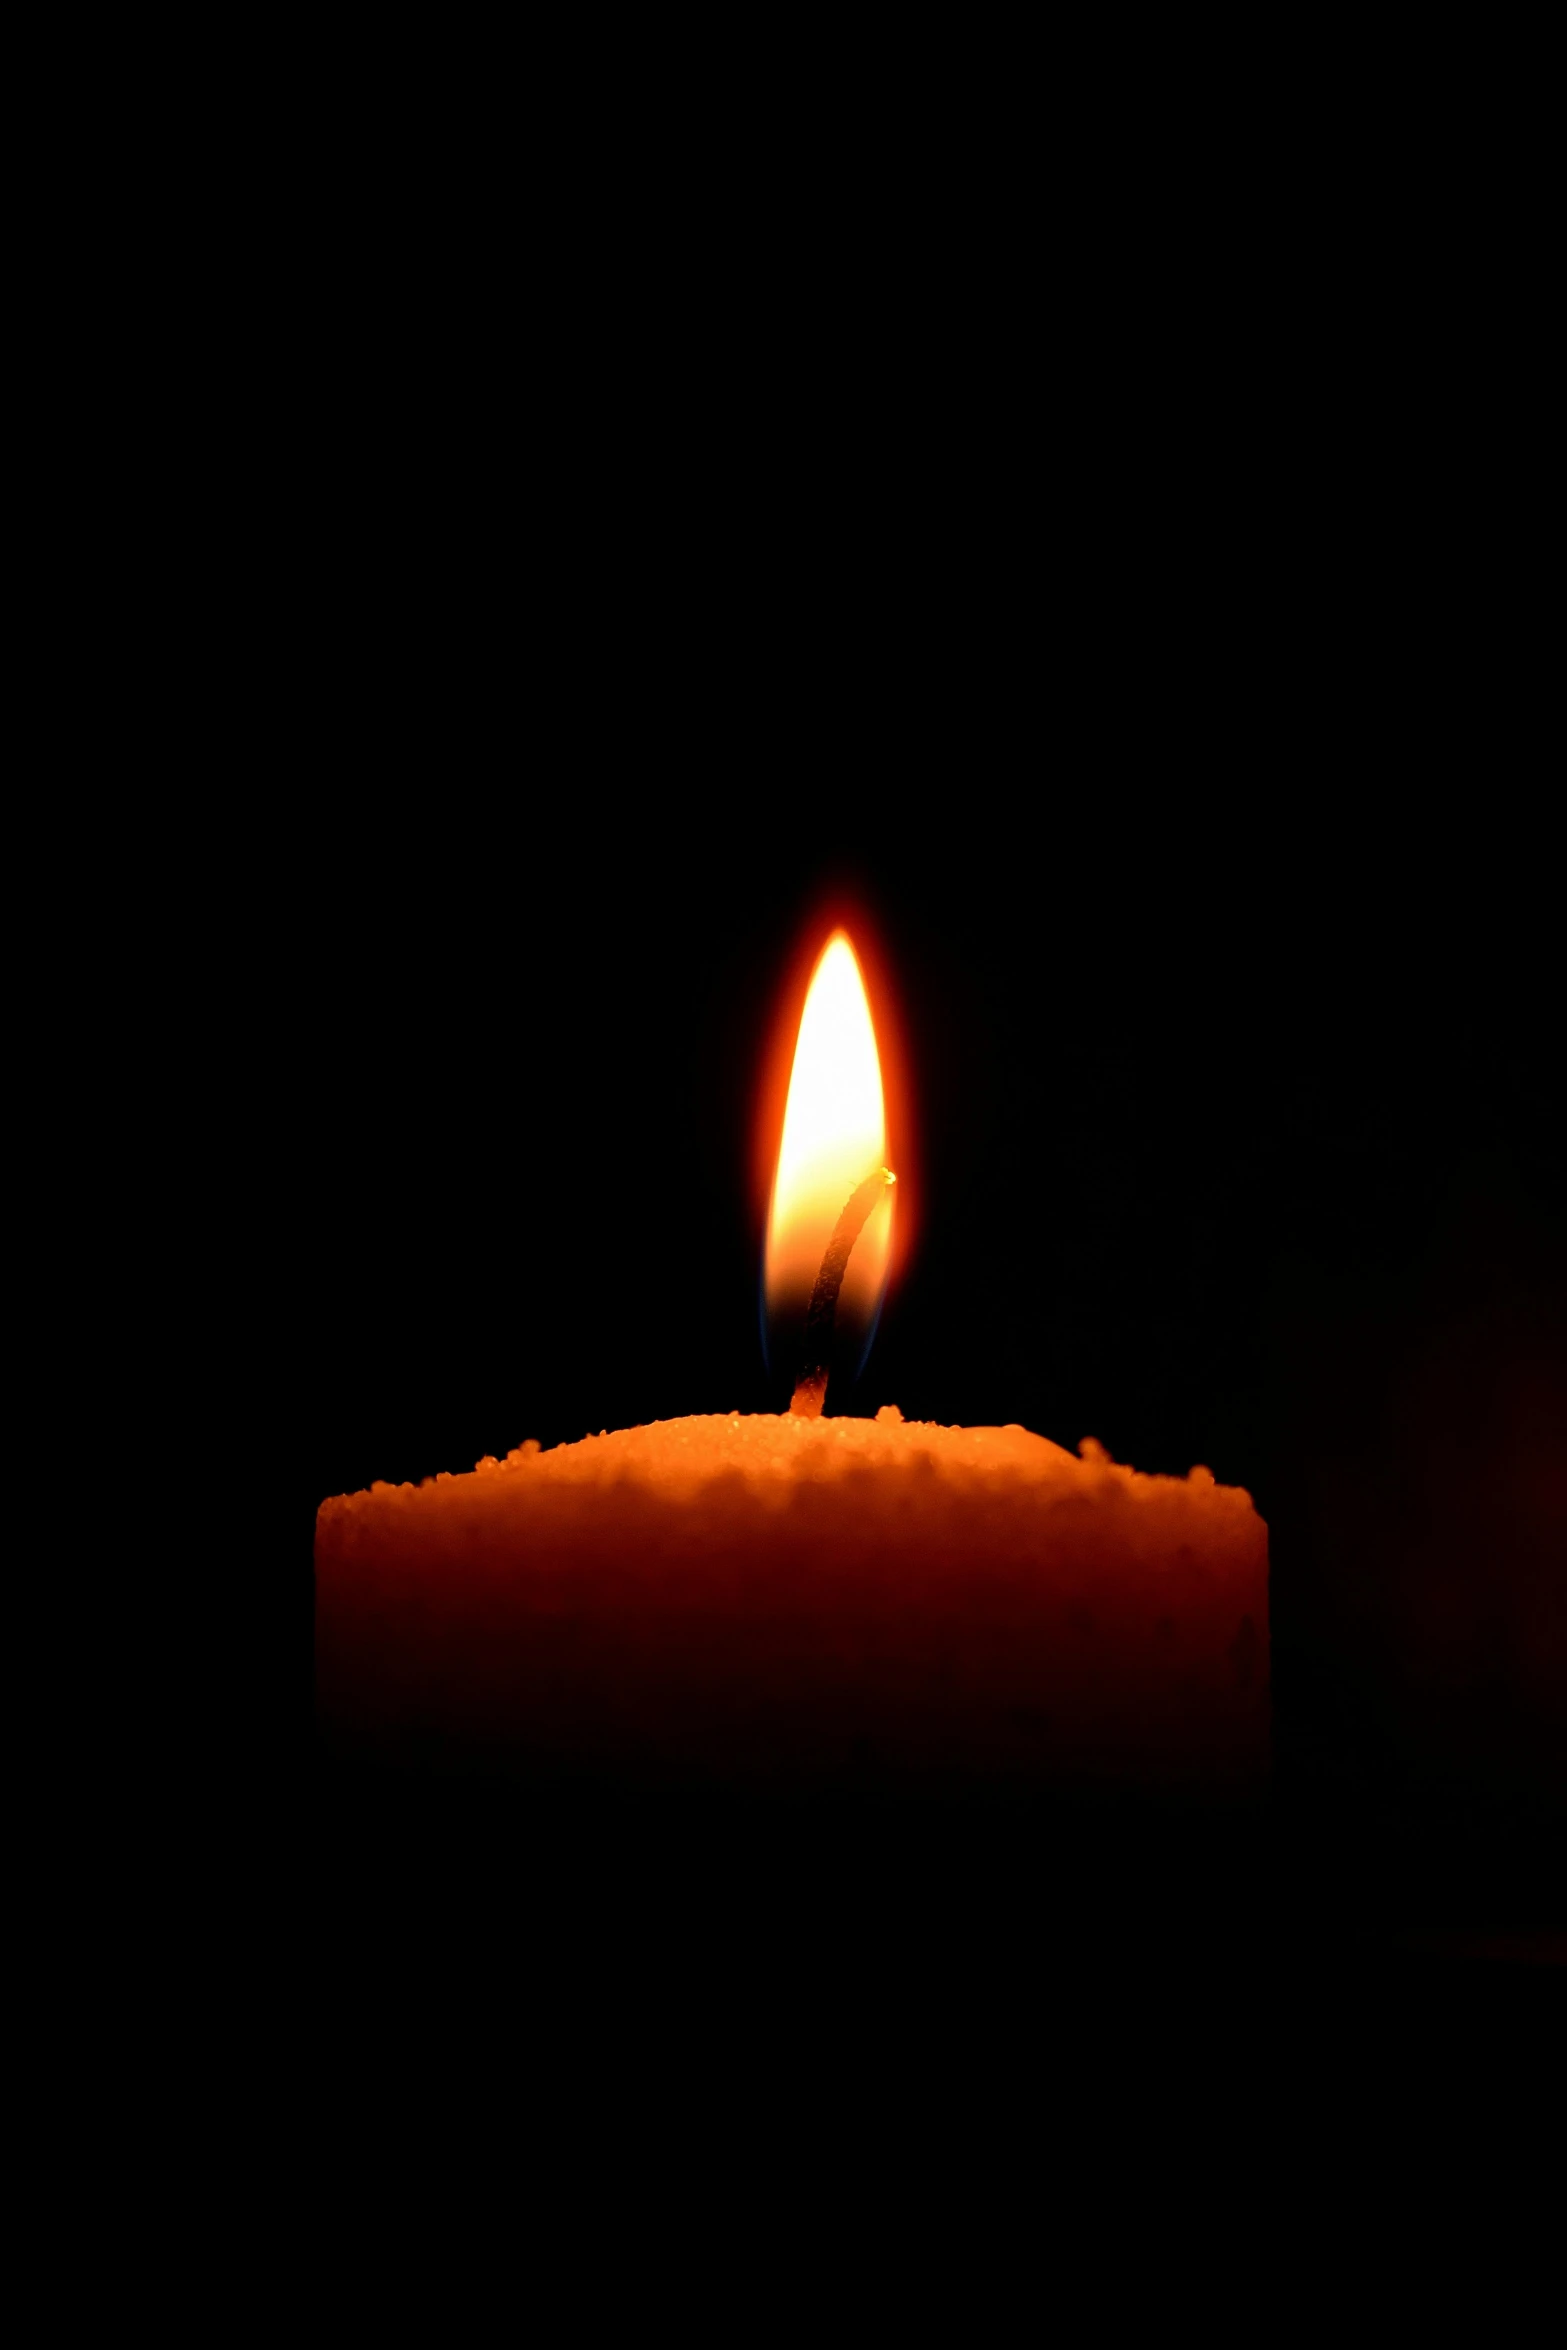 a candle is lit in the dark, a picture, flickr, square, 2995599206, in the middle of the day, screensaver